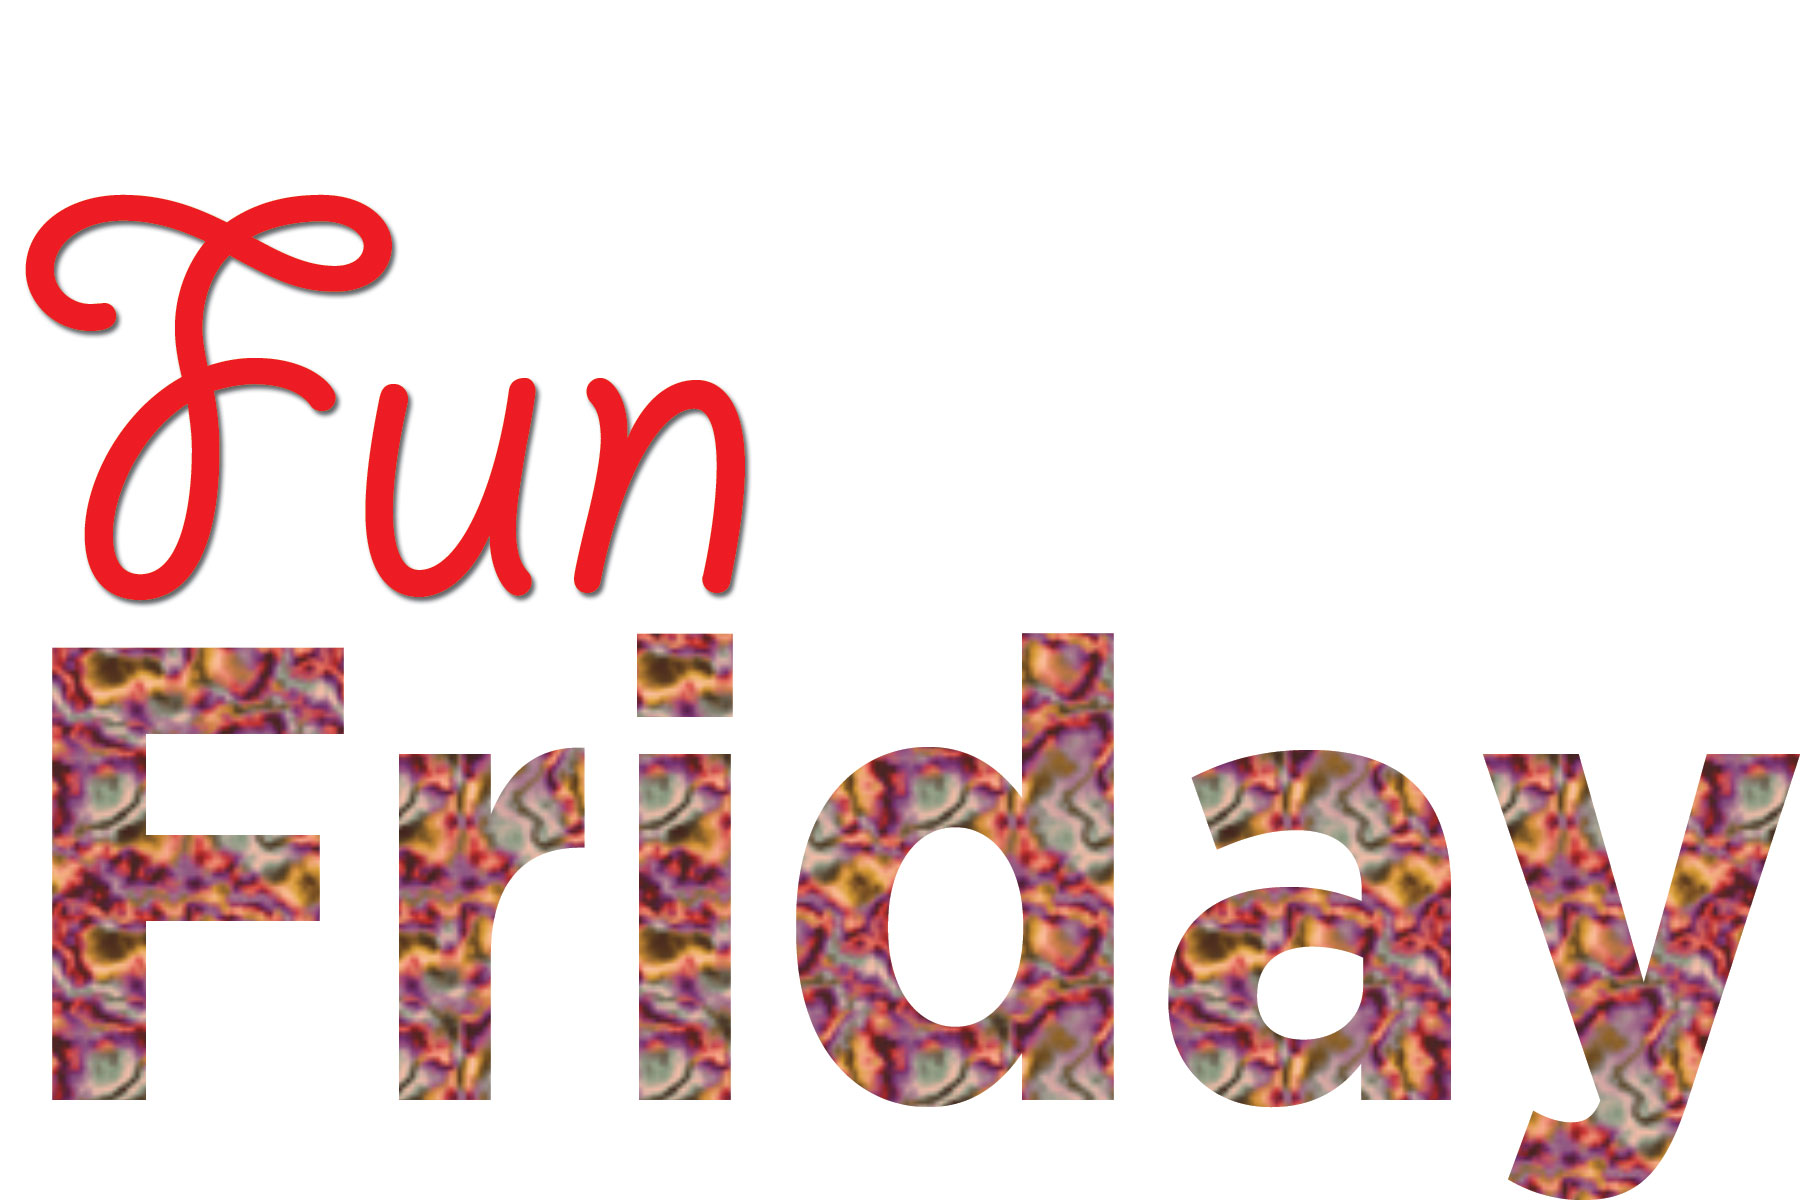 Friday Clipart to Download - dbclipart.com. 